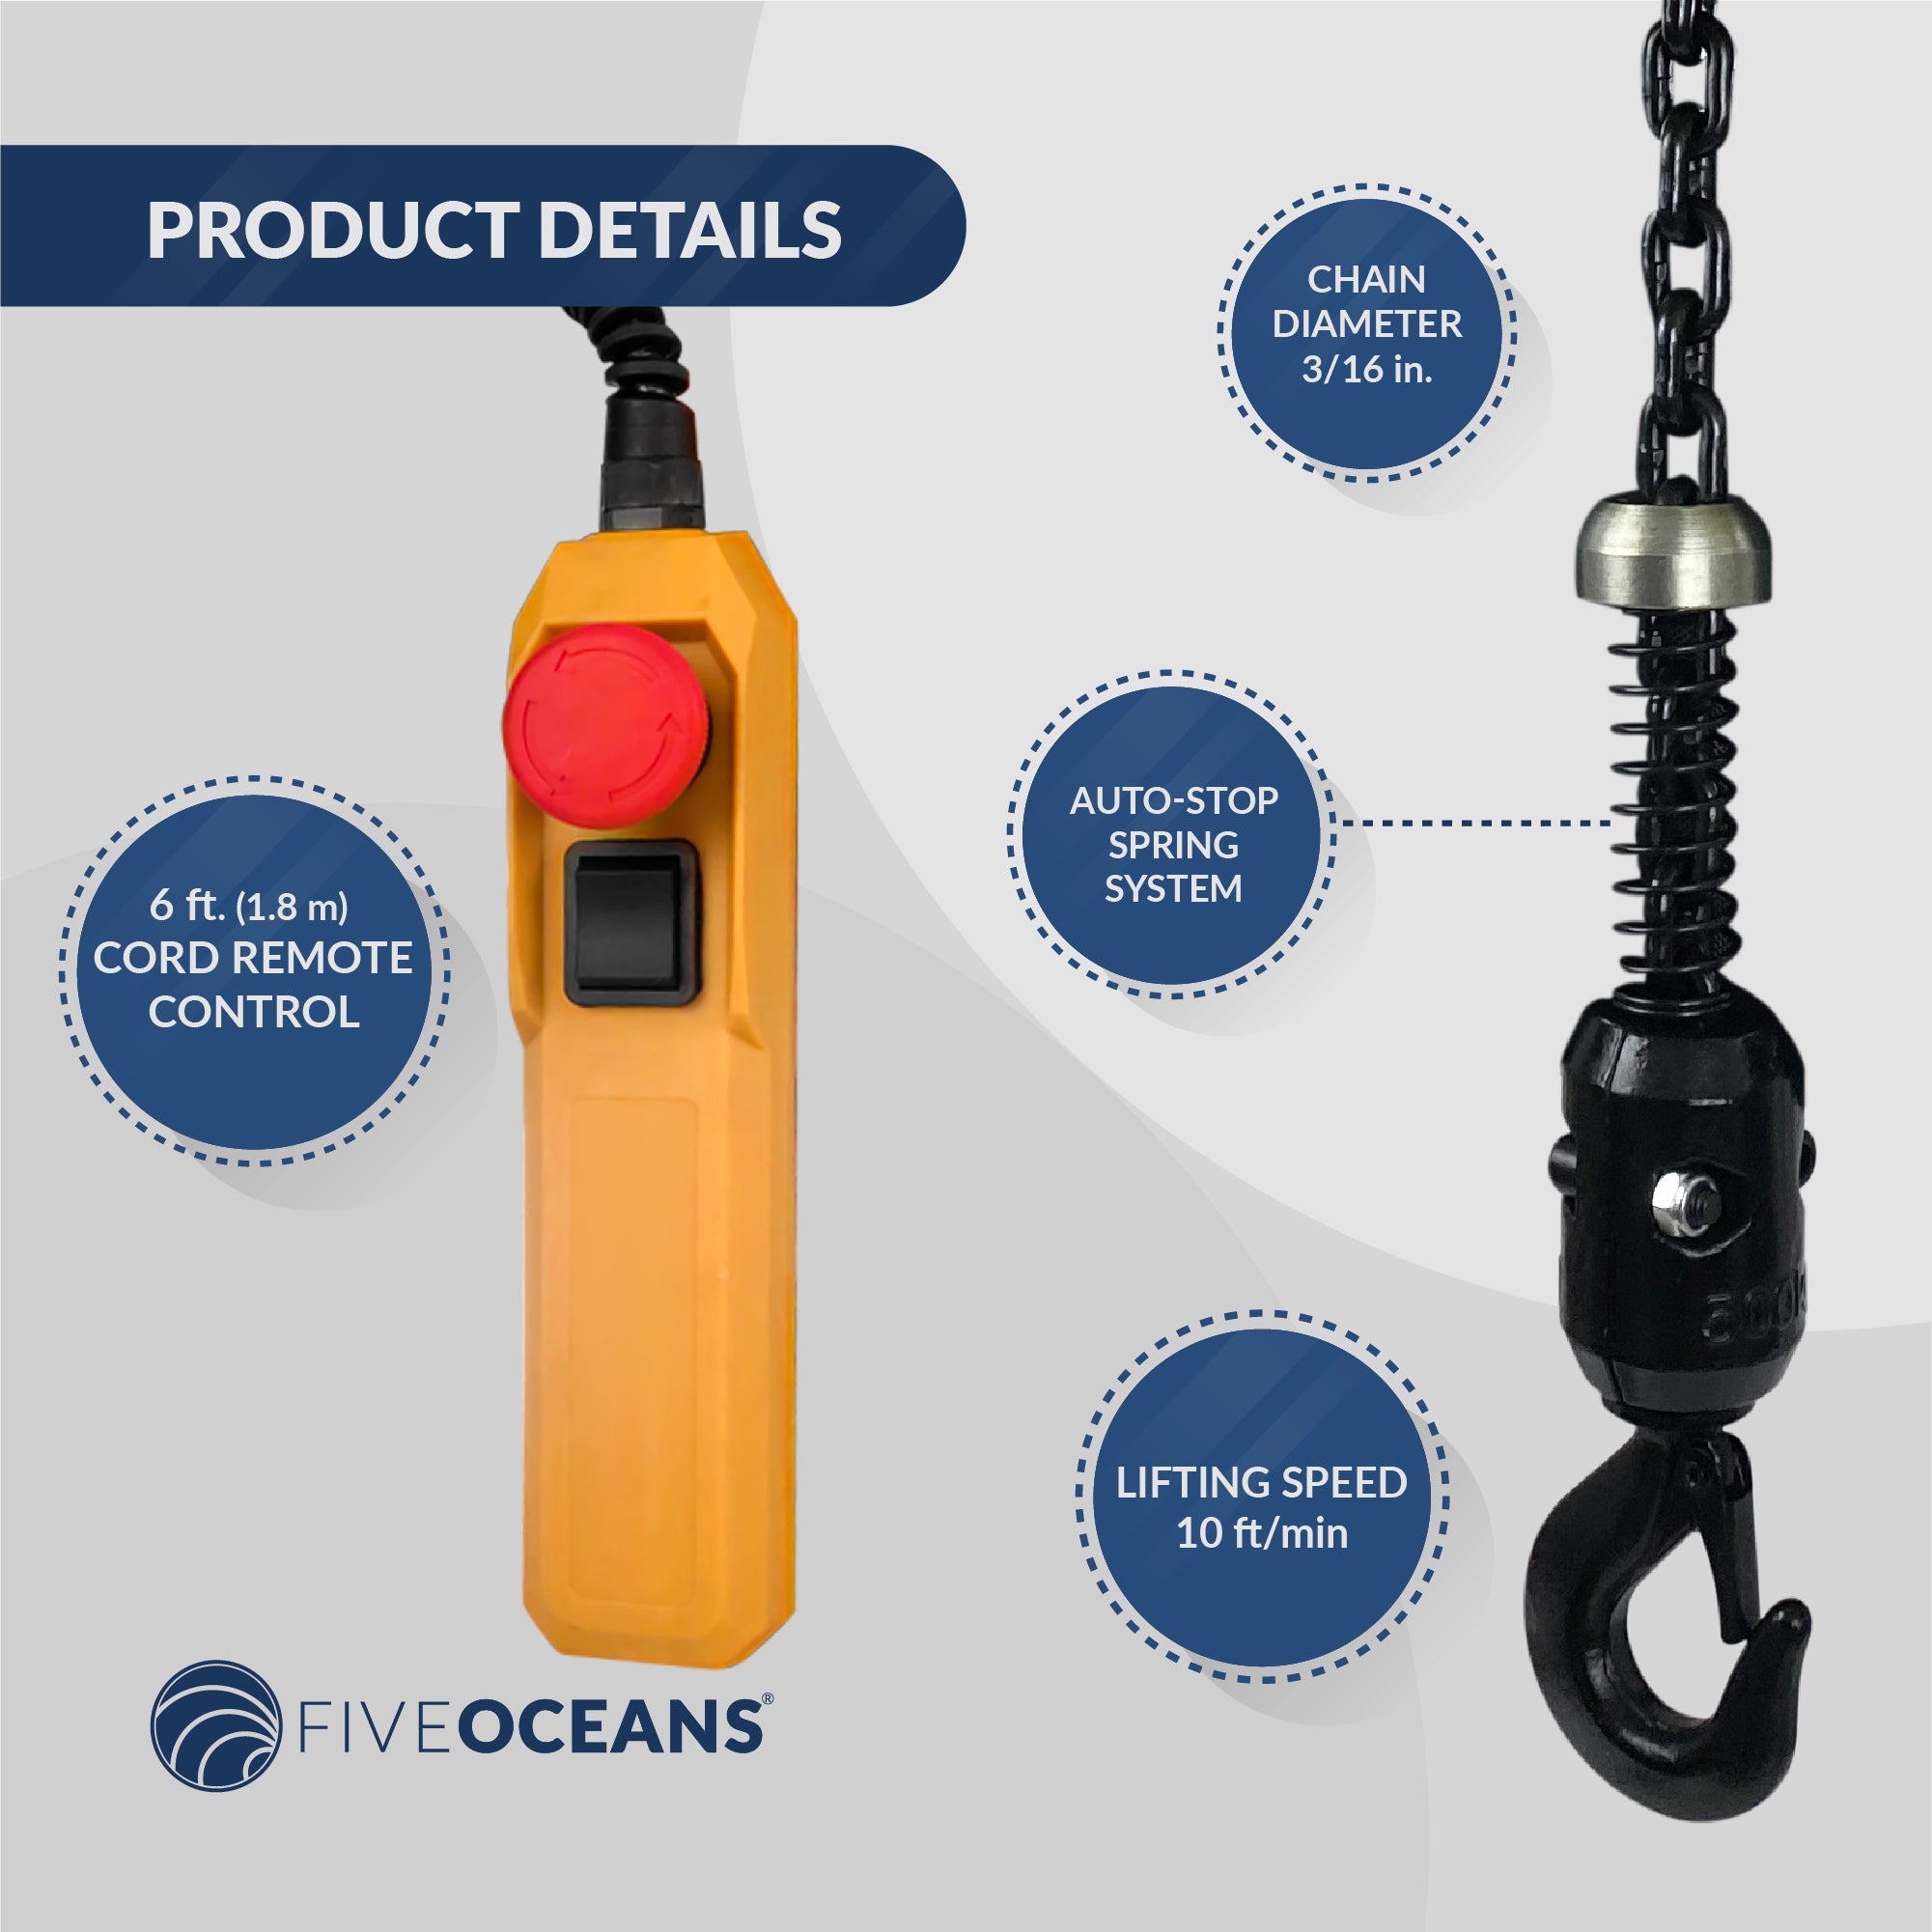 Electric Chain Hoist 660LBS / 300KG, 6 FT Remote Control, 120 V / 60 HZ - FO4438